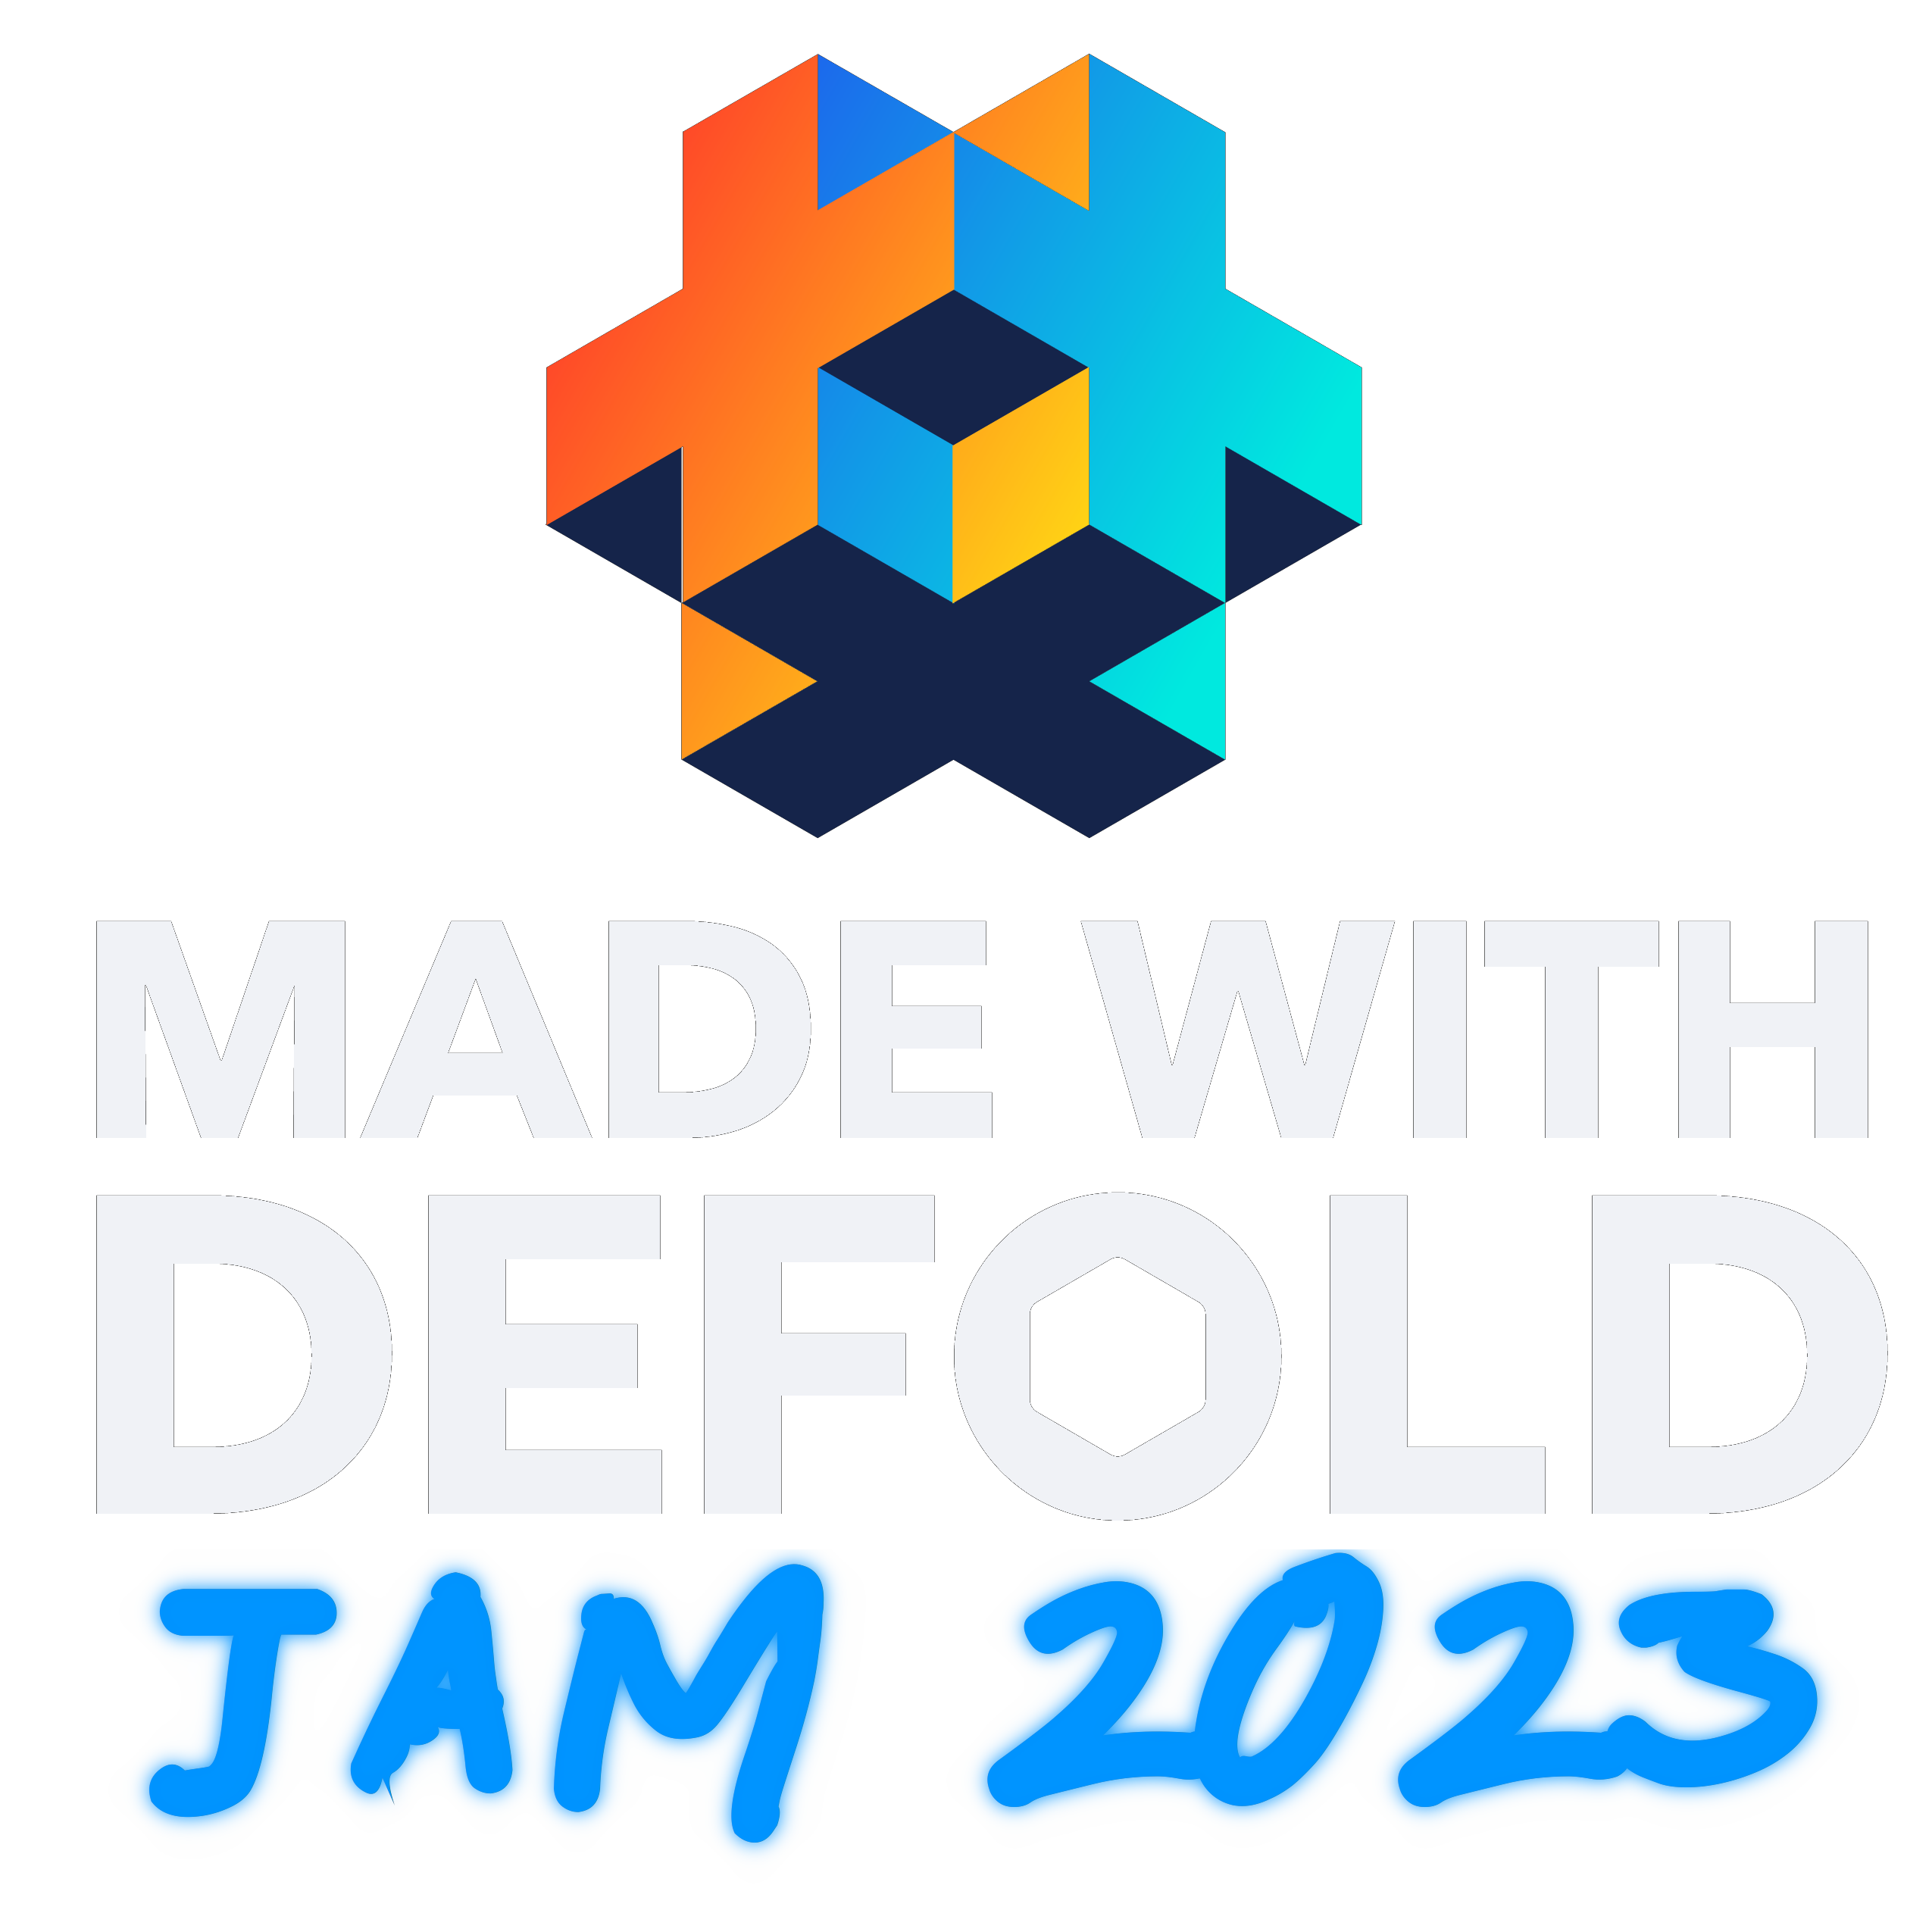 Defold page on itch.io - Announcements - Defold game engine forum